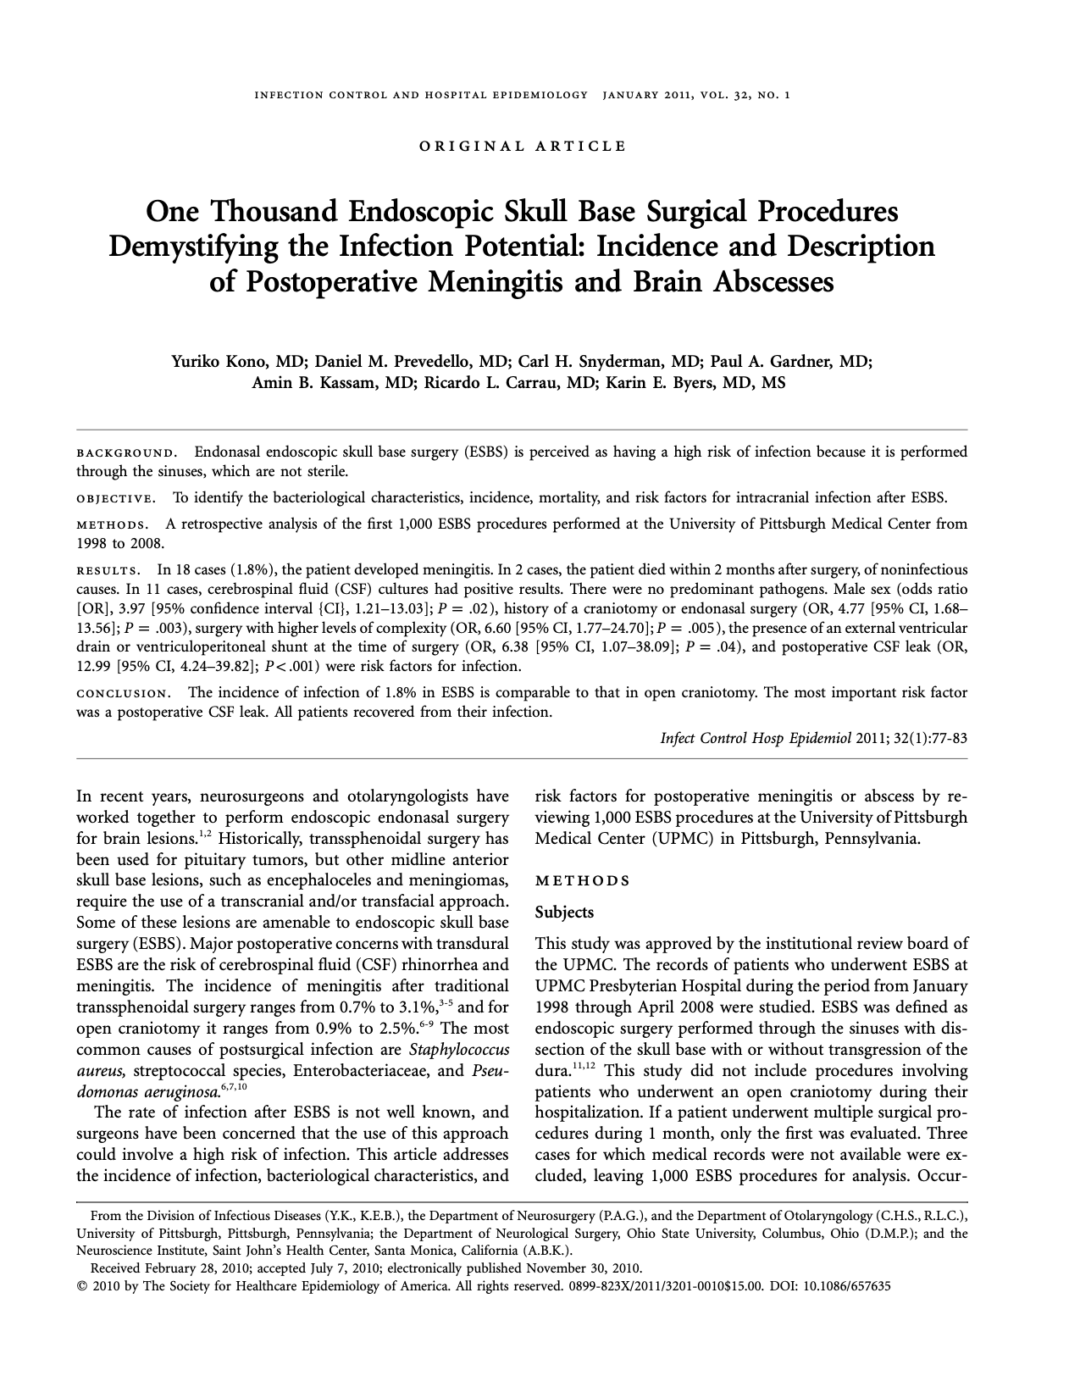 One Thousand Endoscopic Skull Base Surgical Procedures Demystifying the Infection Potential: Incidence and Description of Postoperative Meningitis and Brain Abscesses